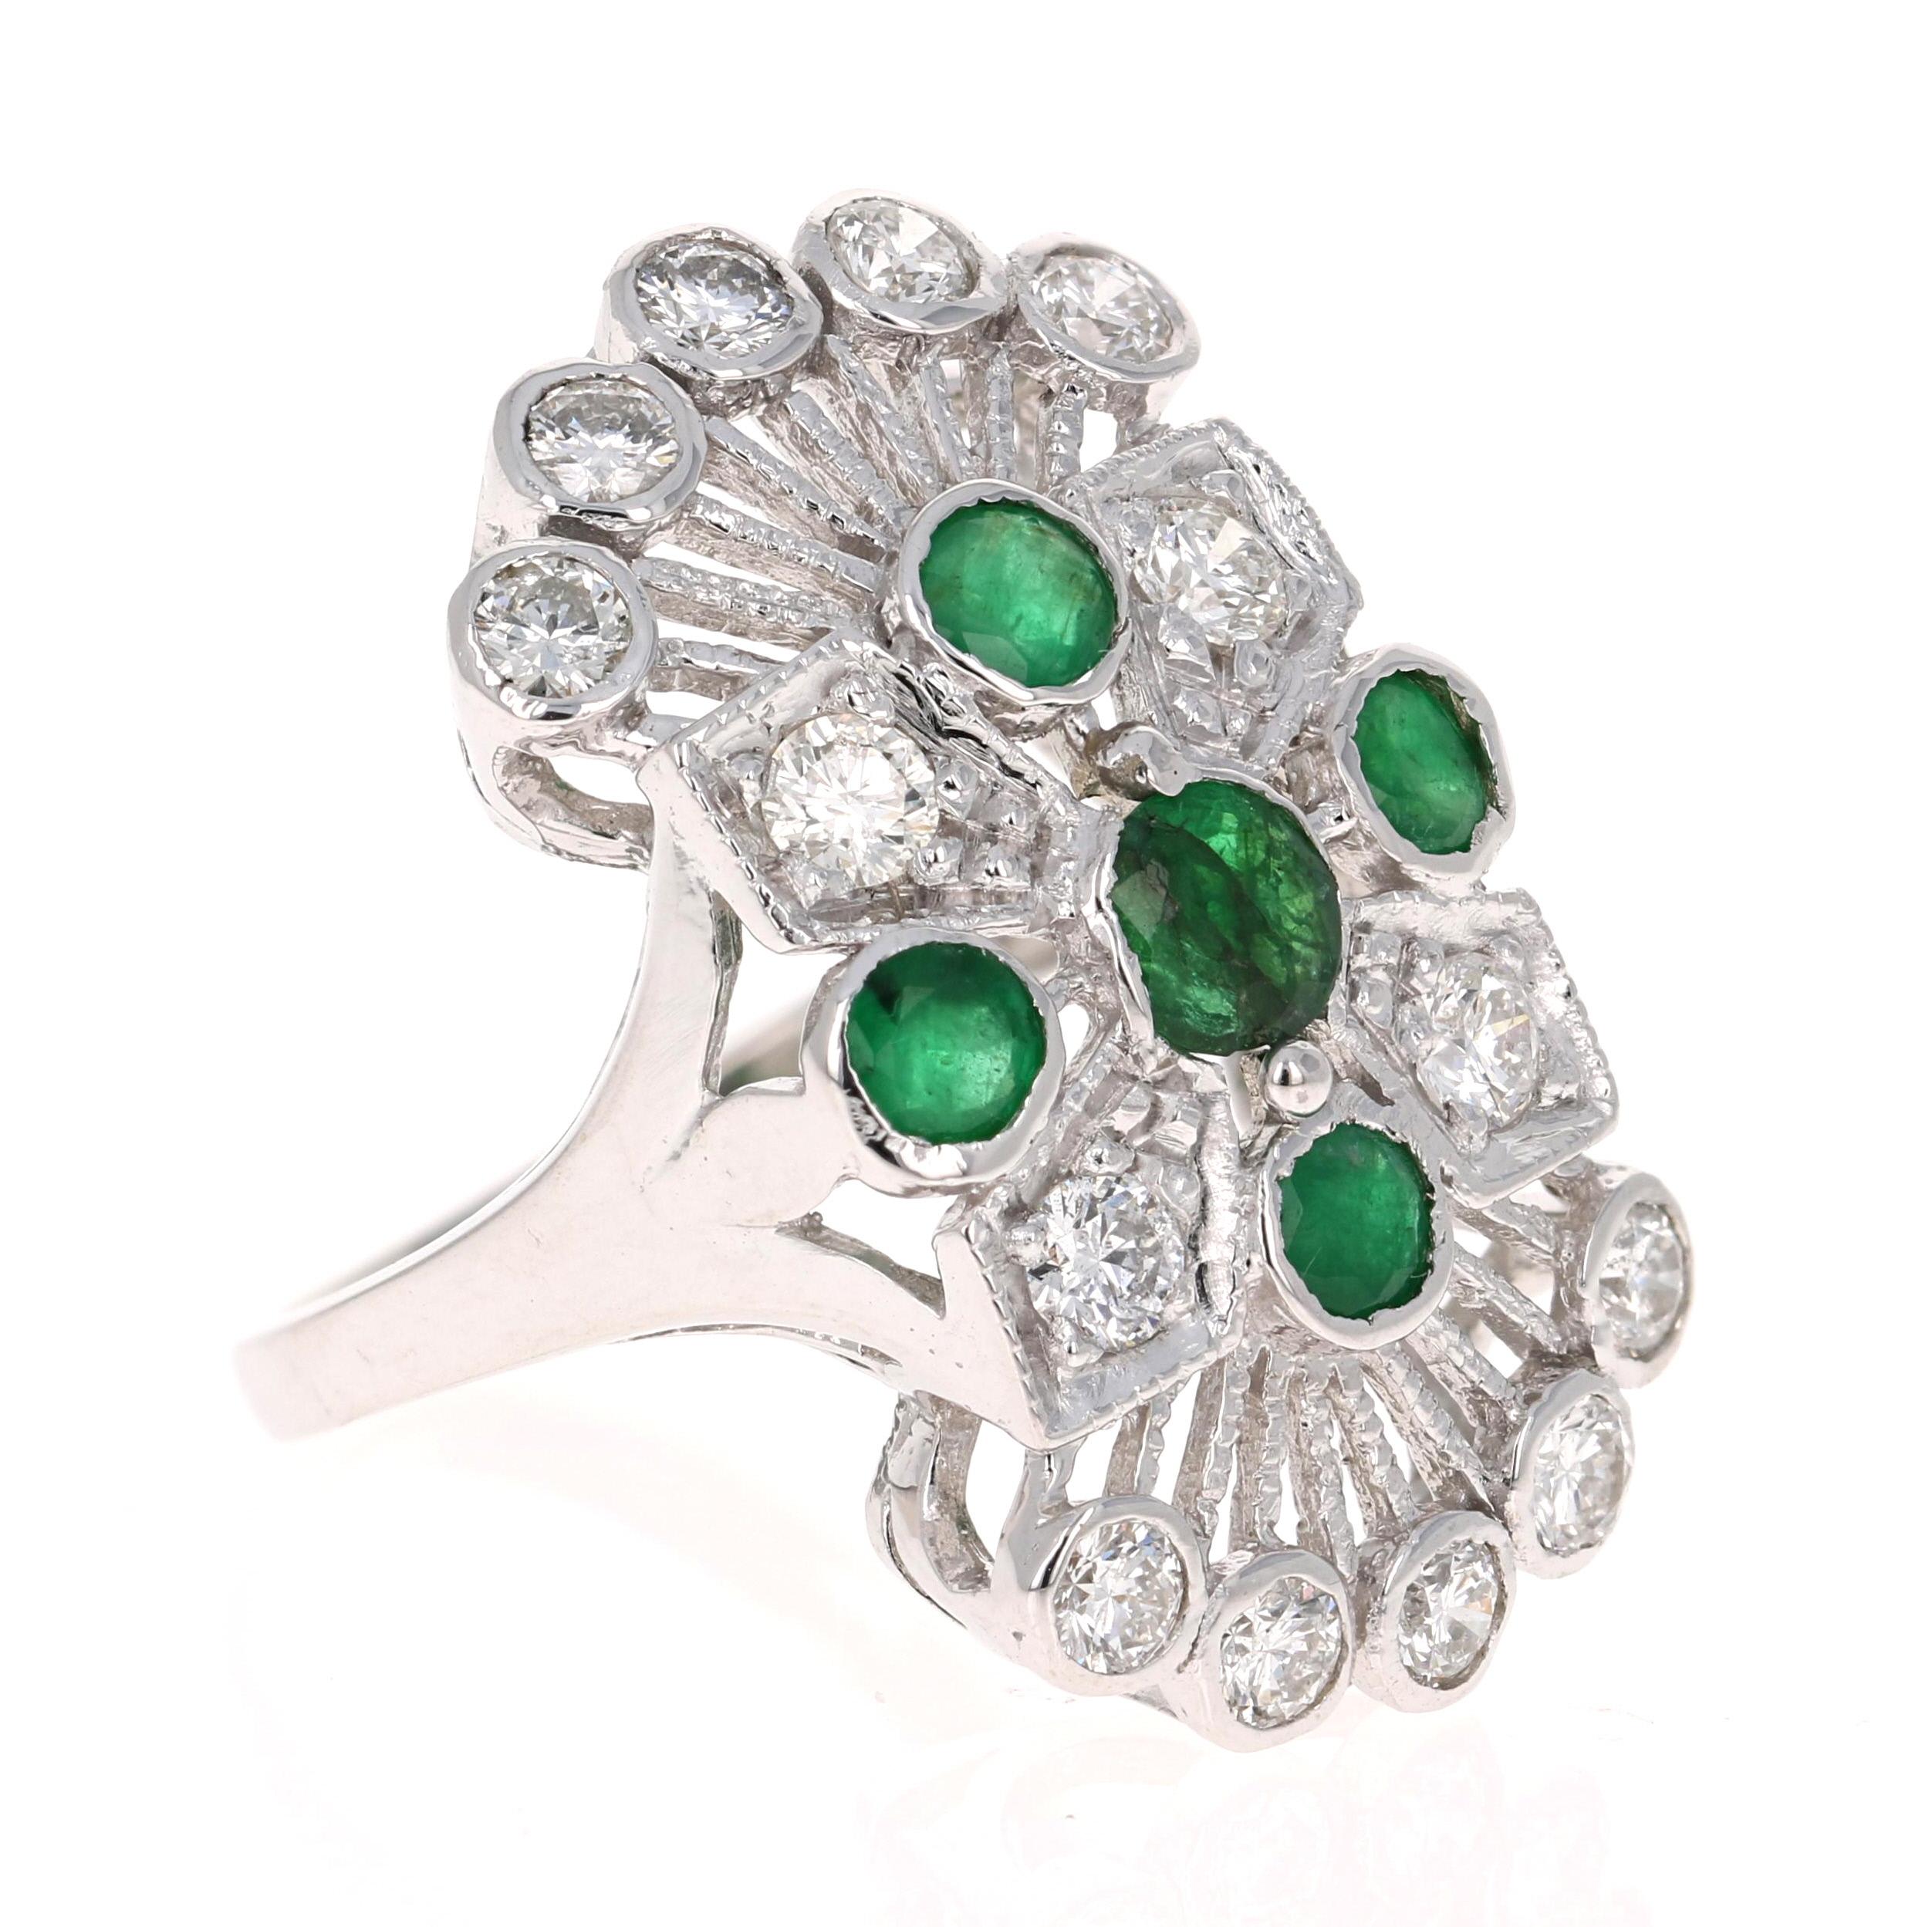 Contemporary 2.85 Carat Emerald and Diamond 14 Karat White Gold Cocktail Ring For Sale